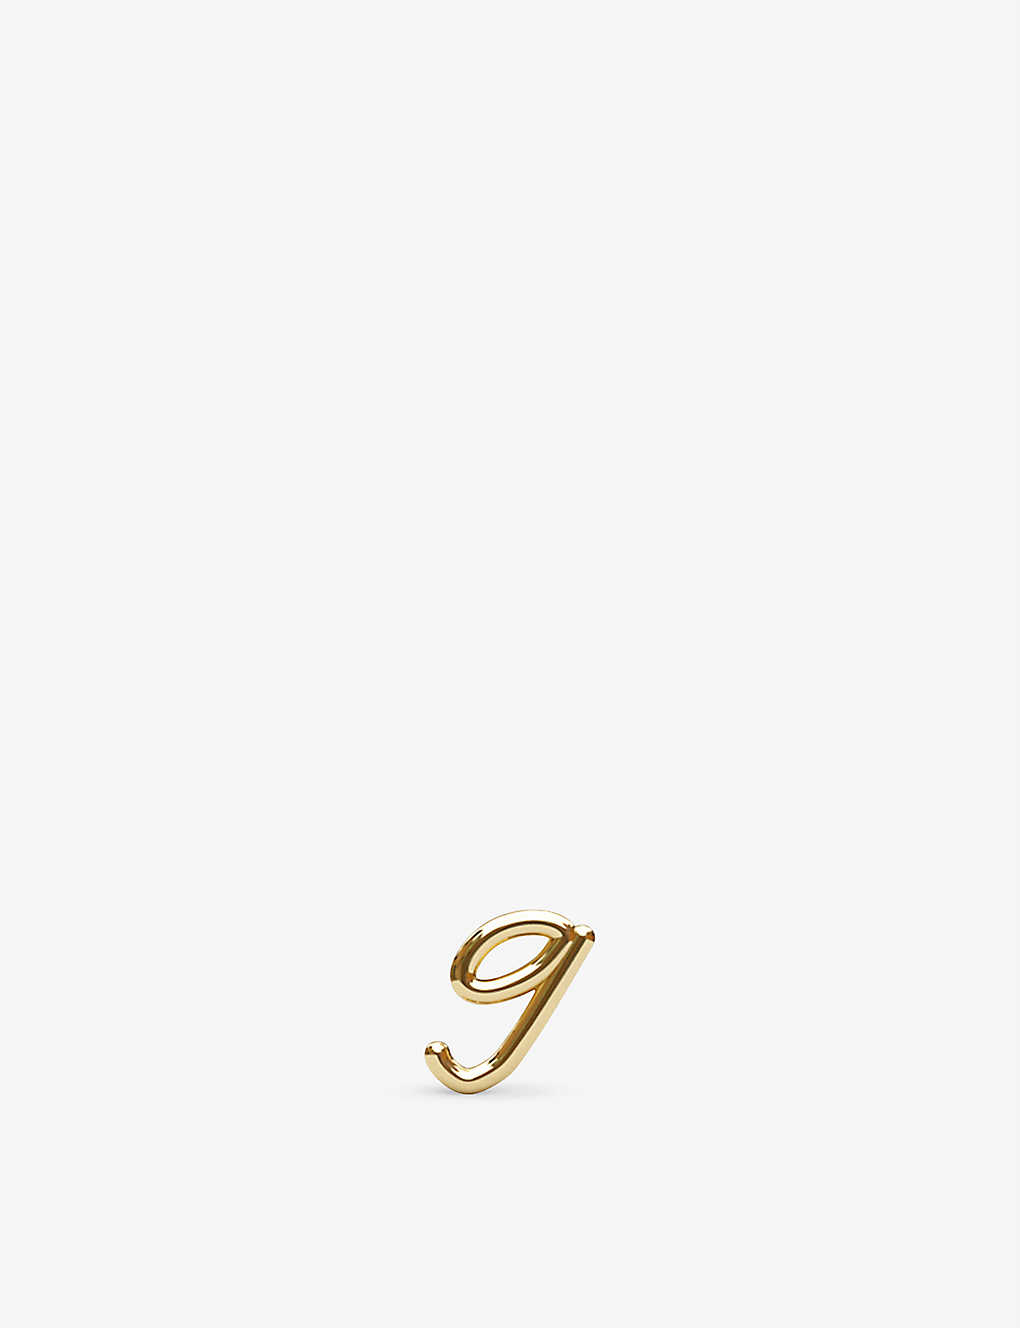 Shop The Alkemistry Womens 18ct Yellow Gold Love Letter G Initial 18ct Yellow Gold Single Stud Earring